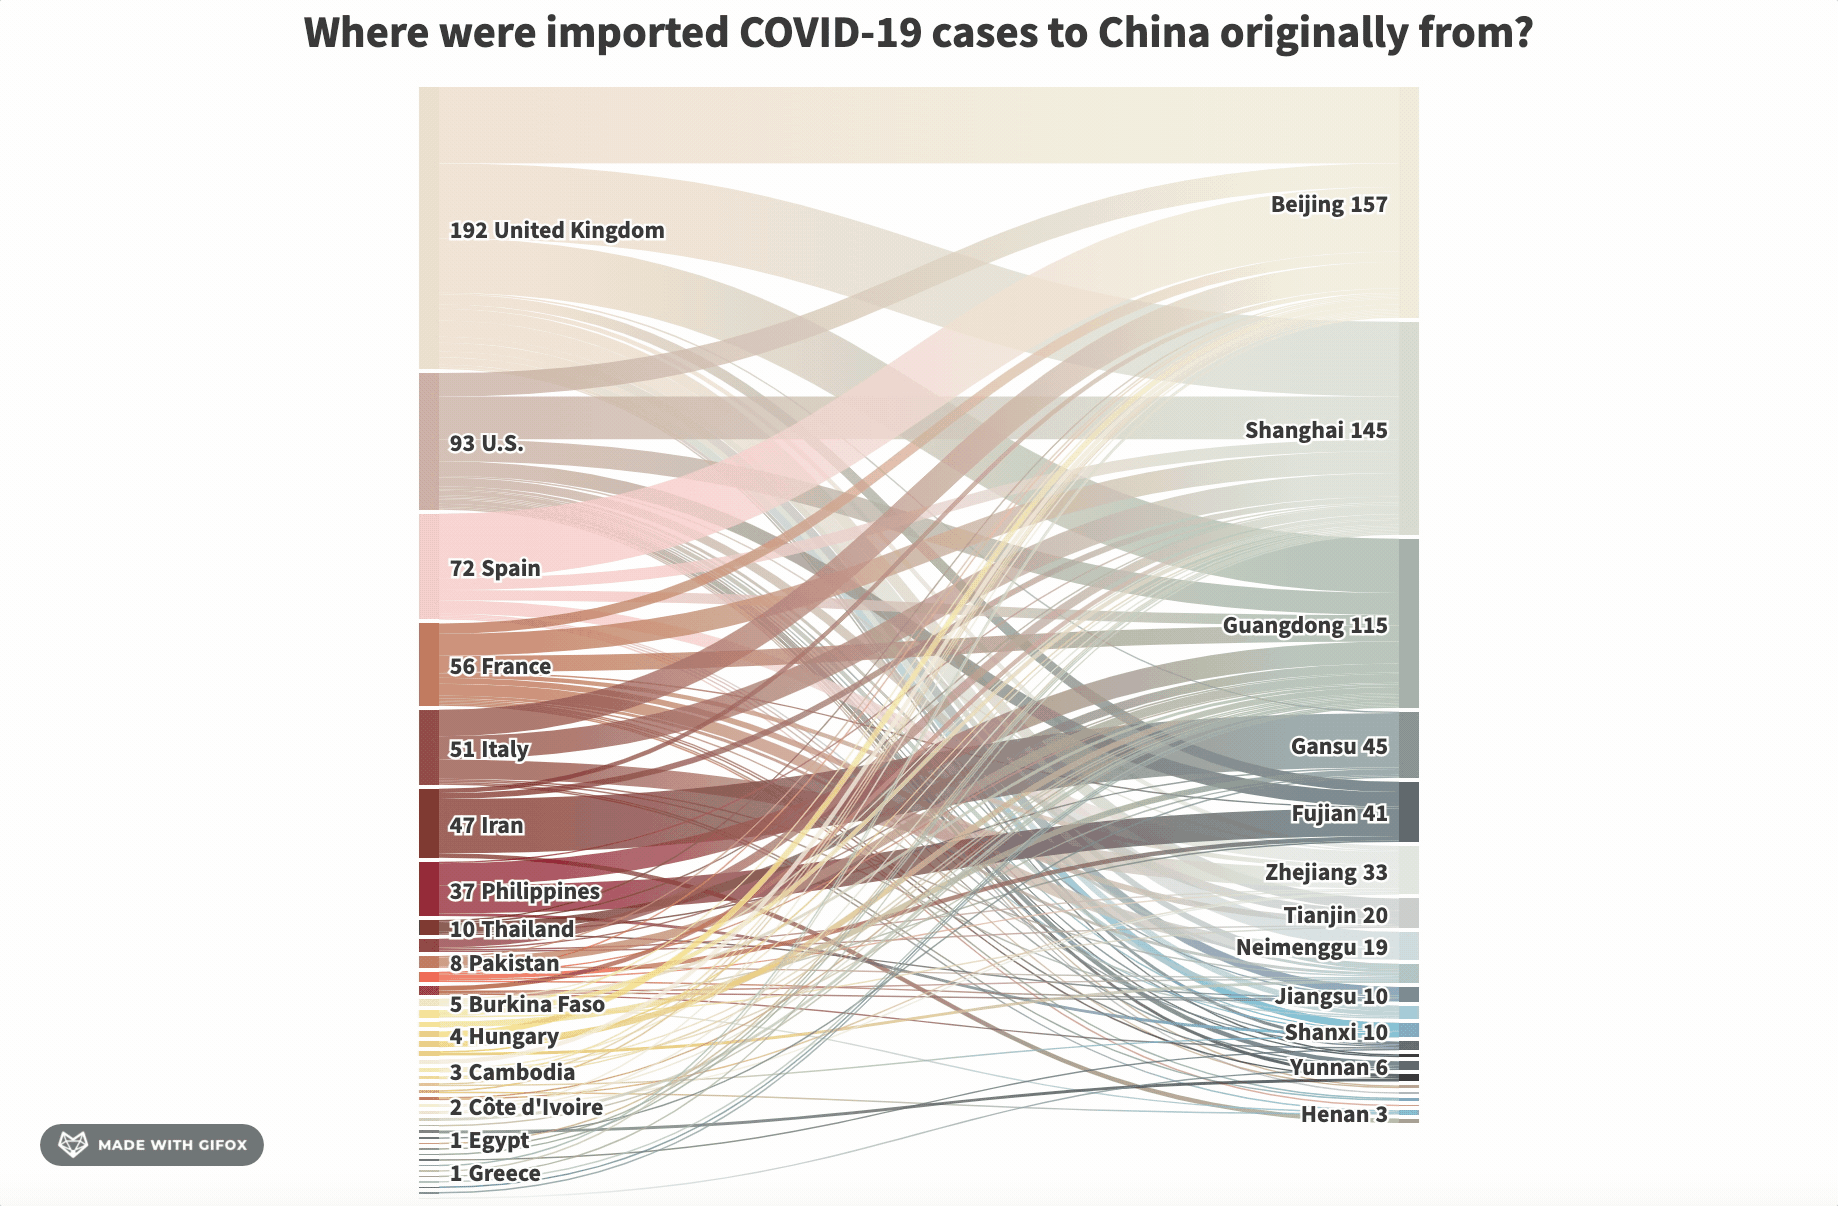 a sankey chart showing whwere the imported COVID-19 cases in China were from and which provinces in China they went to